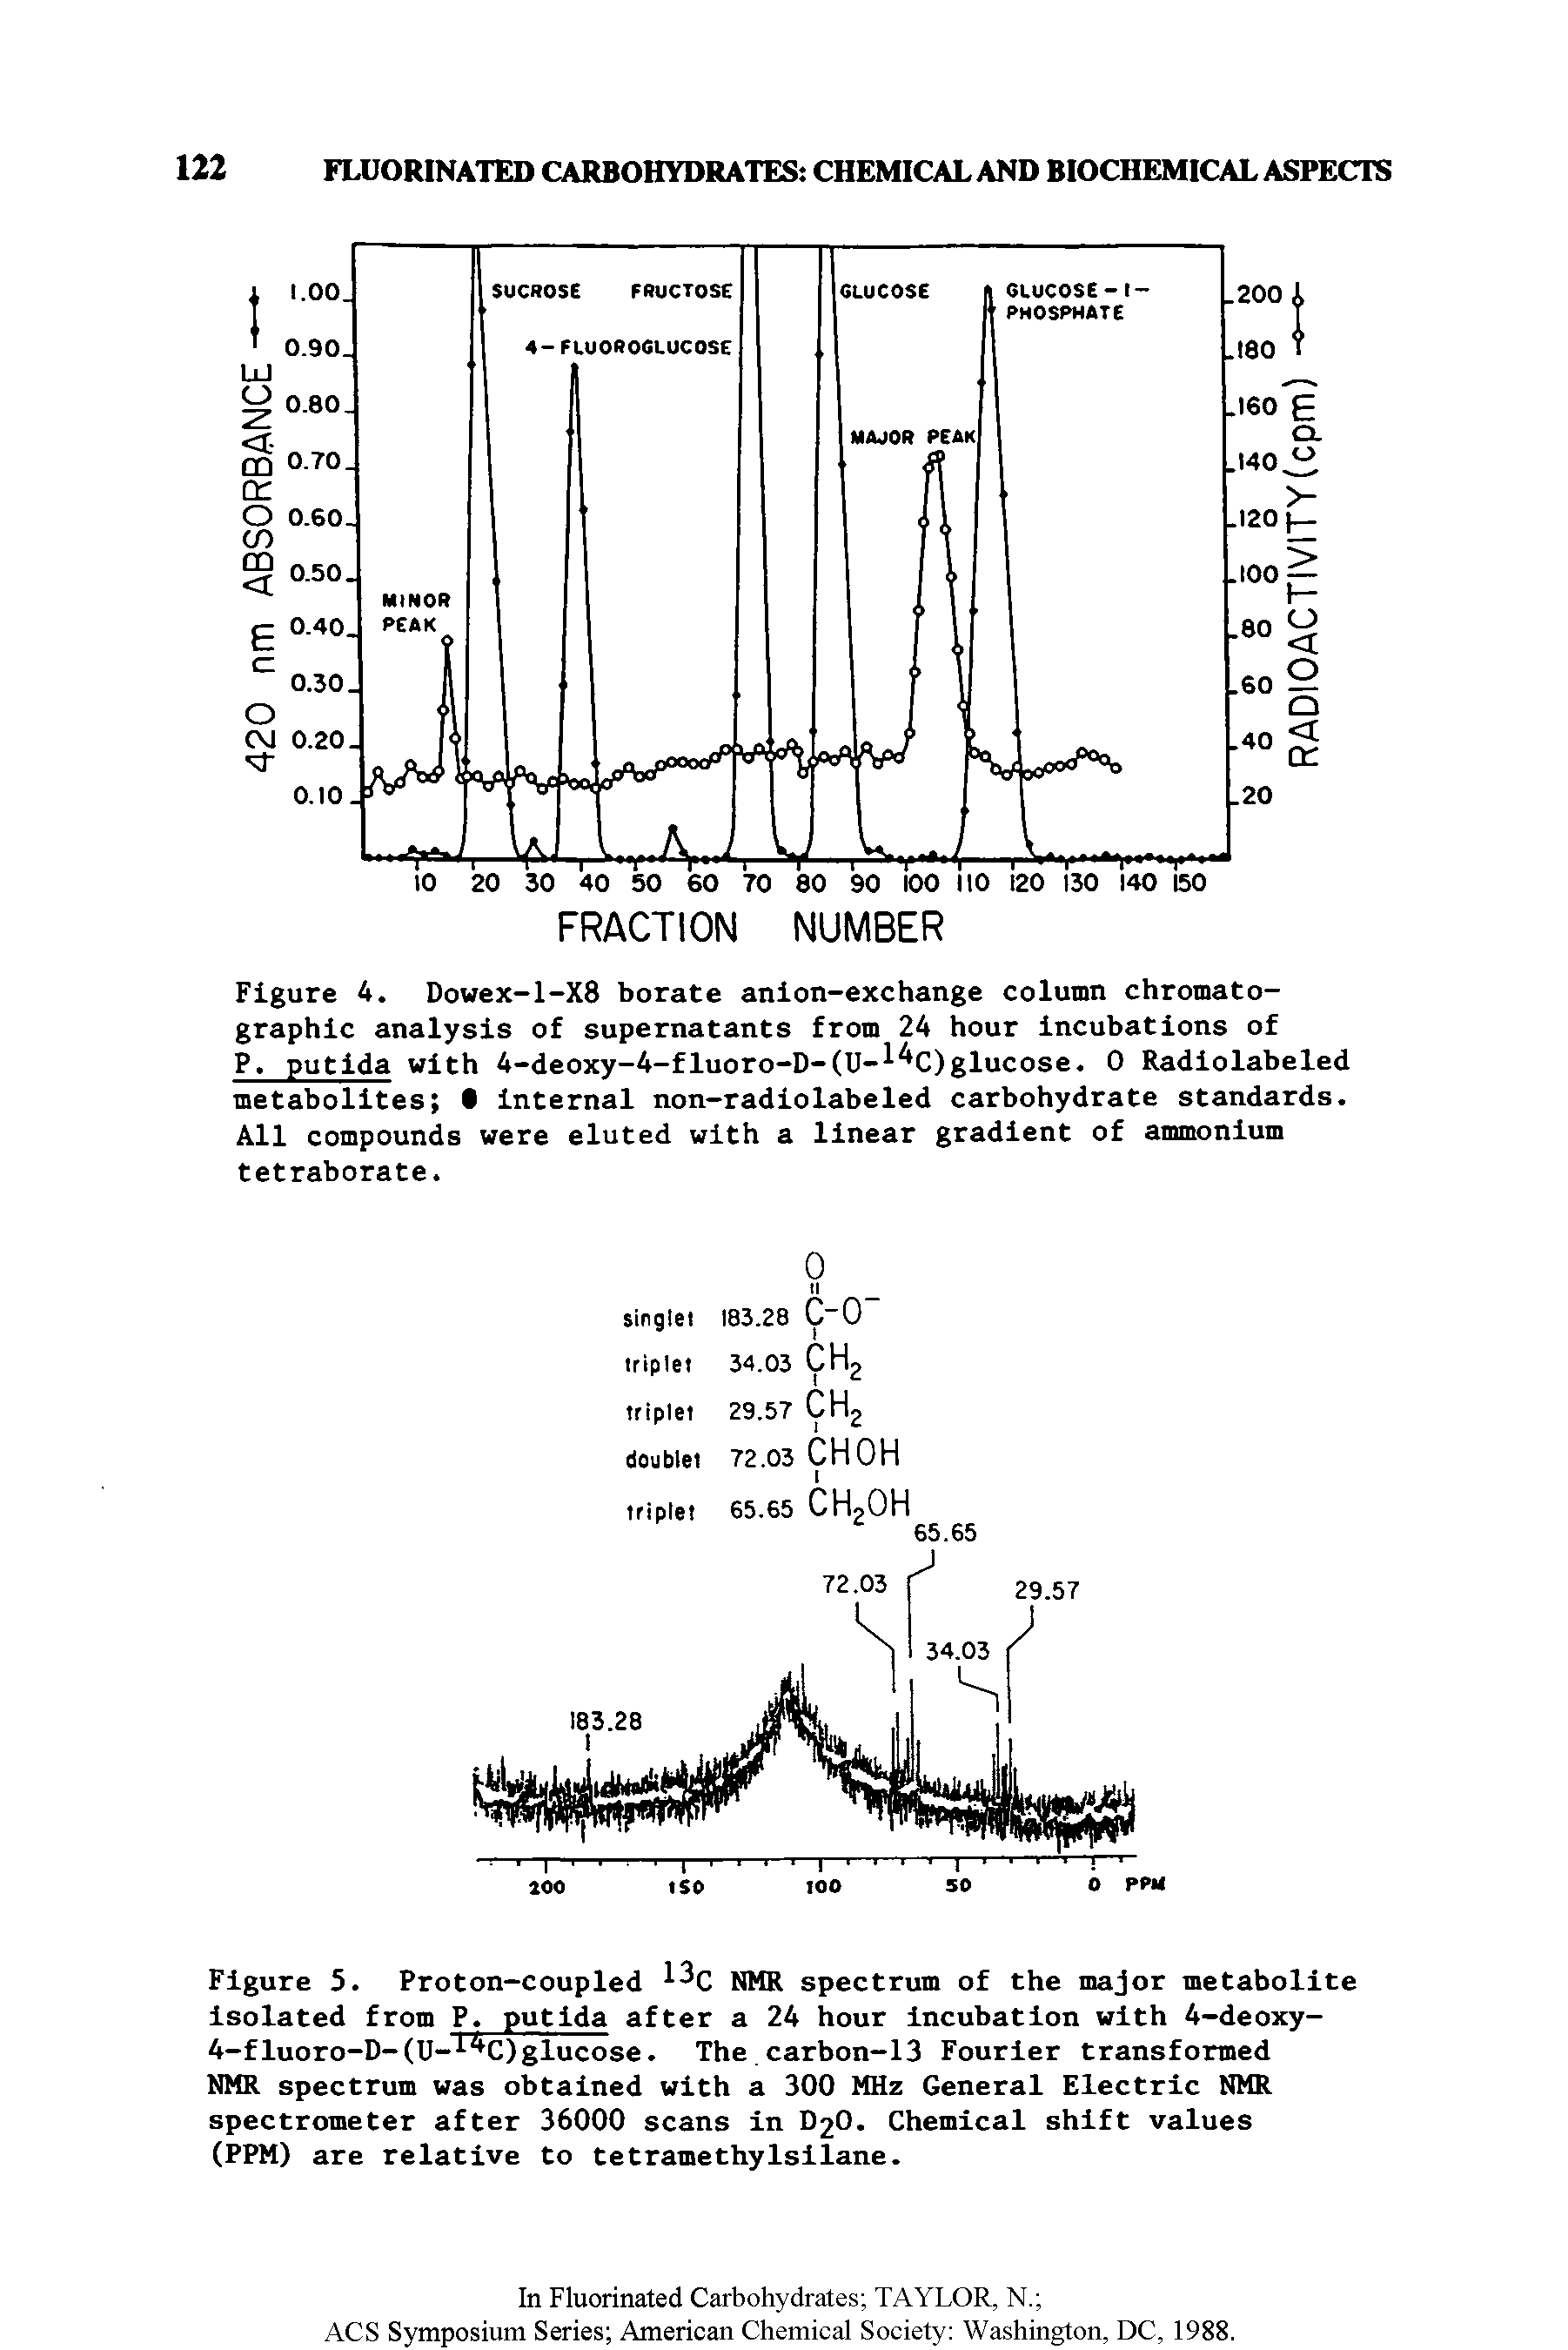 Figure 5. Proton-coupled NMR spectrum of the major metabolite Isolated from P. putida after a 24 hour incubation with 4-deoxy-4-fluoro-D- (U-glucose. The carbon-13 Fourier transformed NMR spectrum was obtained with a 300 MHz General Electric NMR spectrometer after 36000 scans in D2O. Chemical shift values (PPM) are relative to tetramethylsllane.